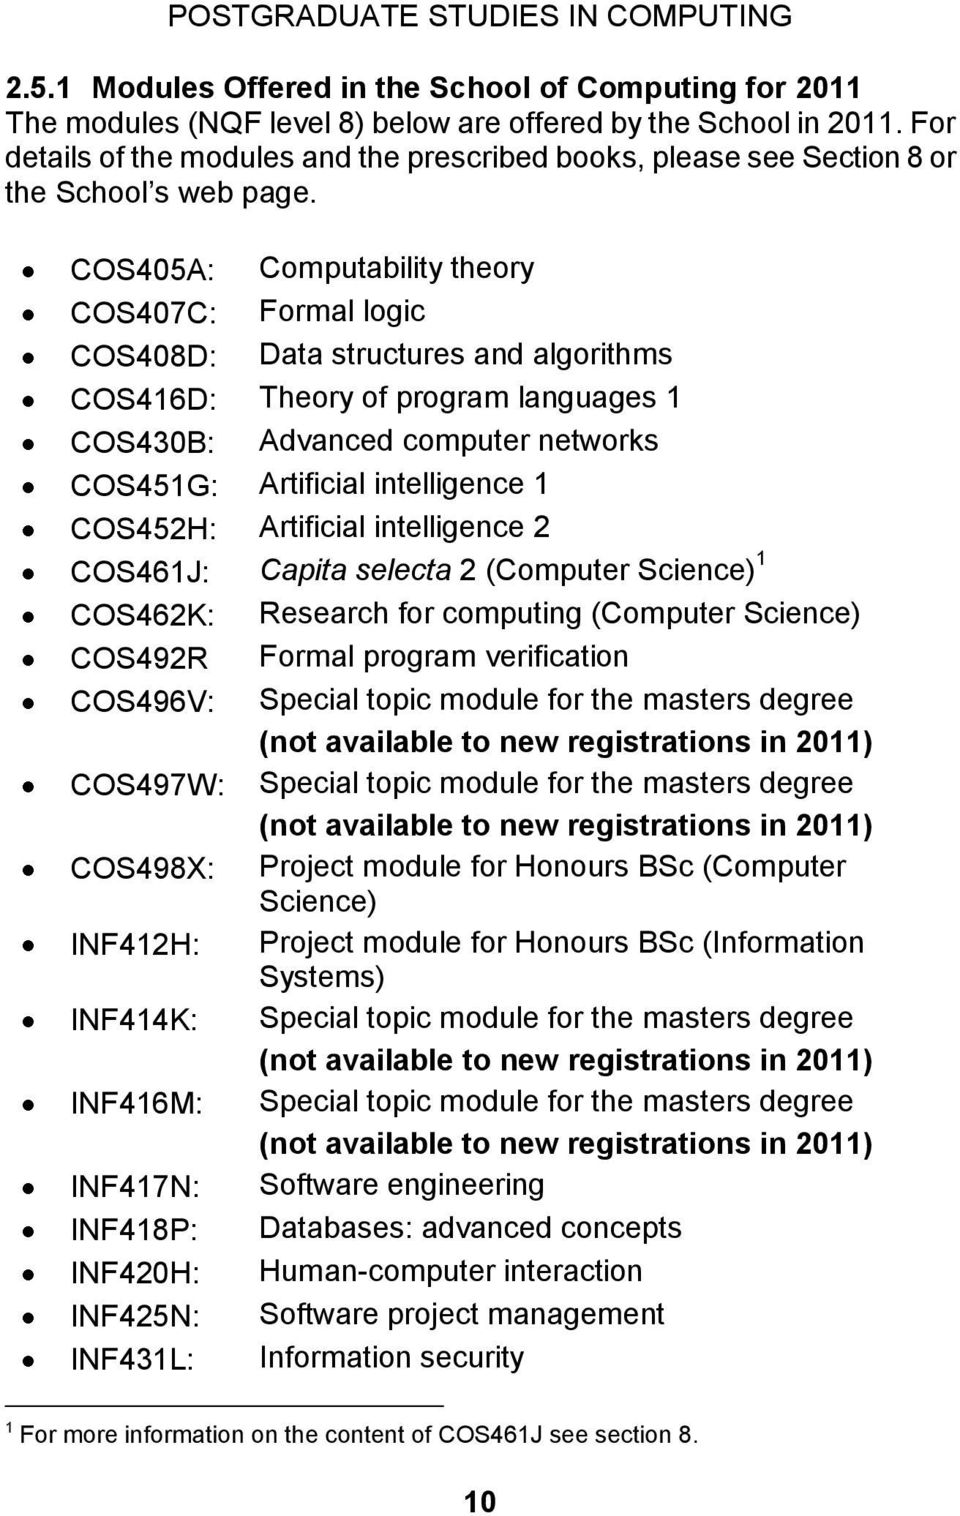 COS405A: Computability theory COS407C: Formal logic COS408D: Data structures and algorithms COS416D: Theory of program languages 1 COS430B: Advanced computer networks COS451G: Artificial intelligence